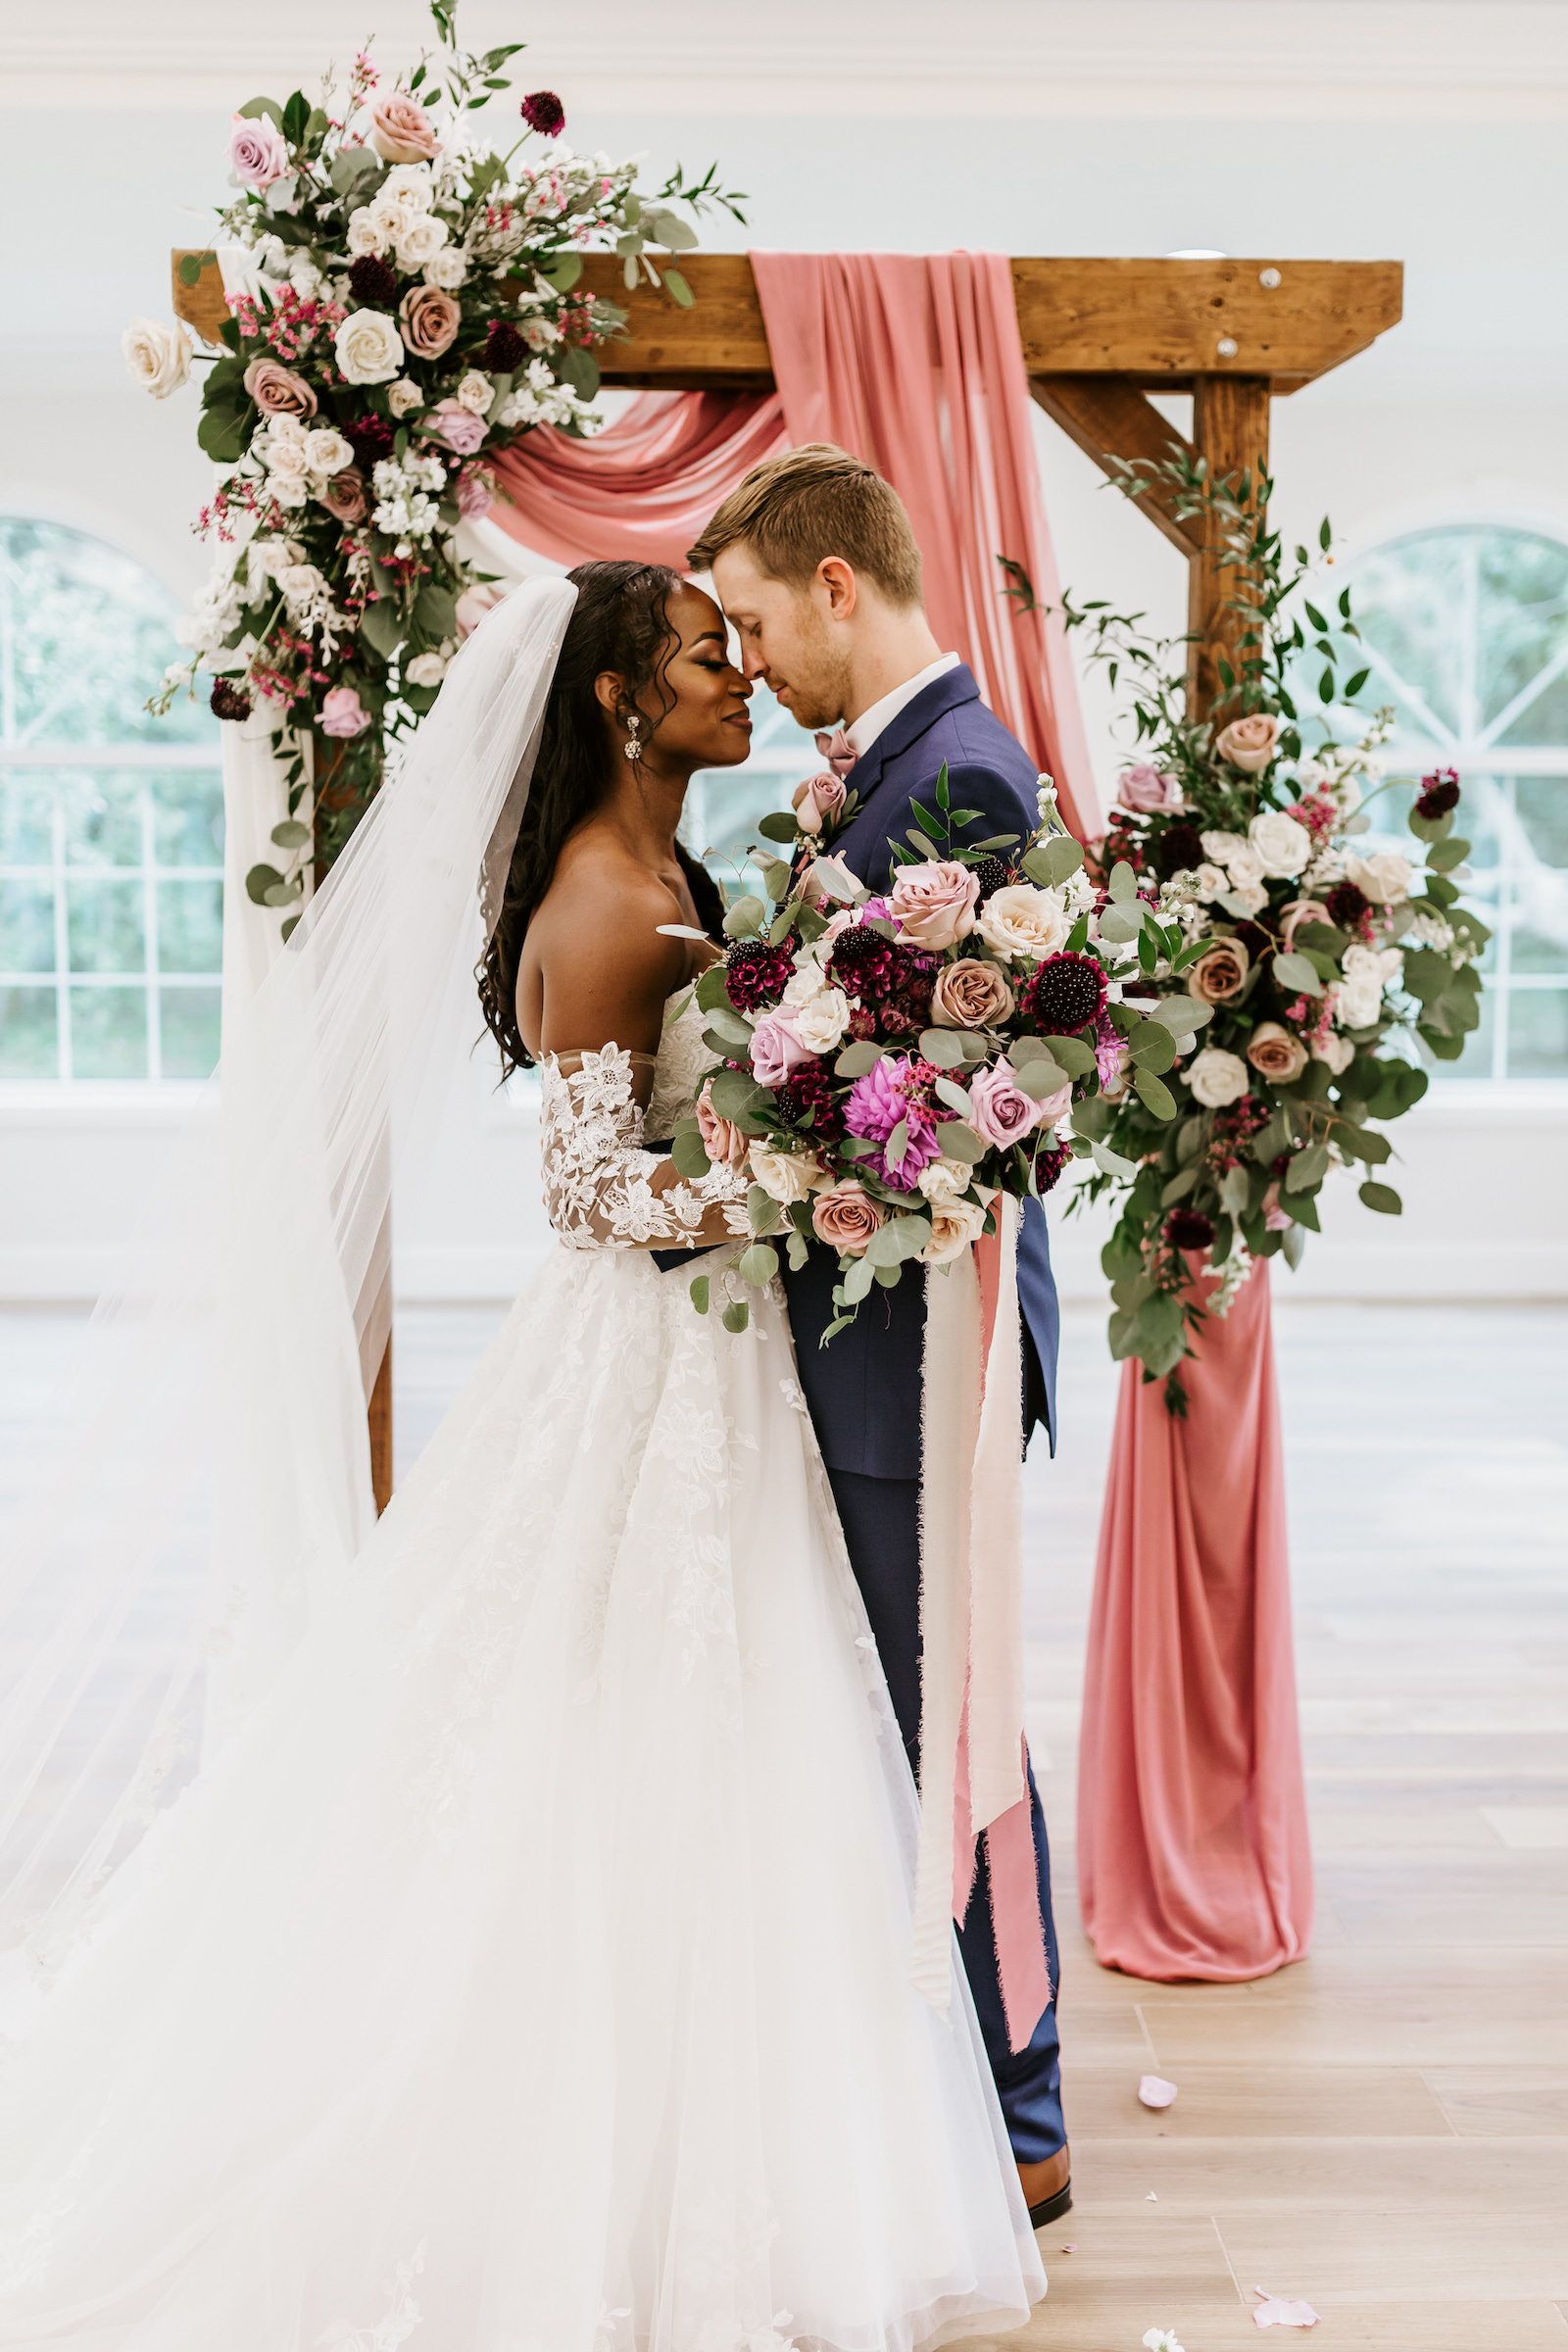 Bride and Groom Indoor Church Portrait at St. Pete Wedding Venue Harborside Chapel | Wood Arch with Draping and Natural Floral Arrangement Swag with Pink and White Roses and Eucalyptus Greenery | Lace and Tulle Ballgown Bridal Gown Wedding Dress with Illusion Lace Long Sleeves | Navy Groom Suit | Bridal Bouquet with Ivory Pink and Burgundy Maroon Roses with Eucalyptus Greenery and Cascading Pink Velvet Ribbons